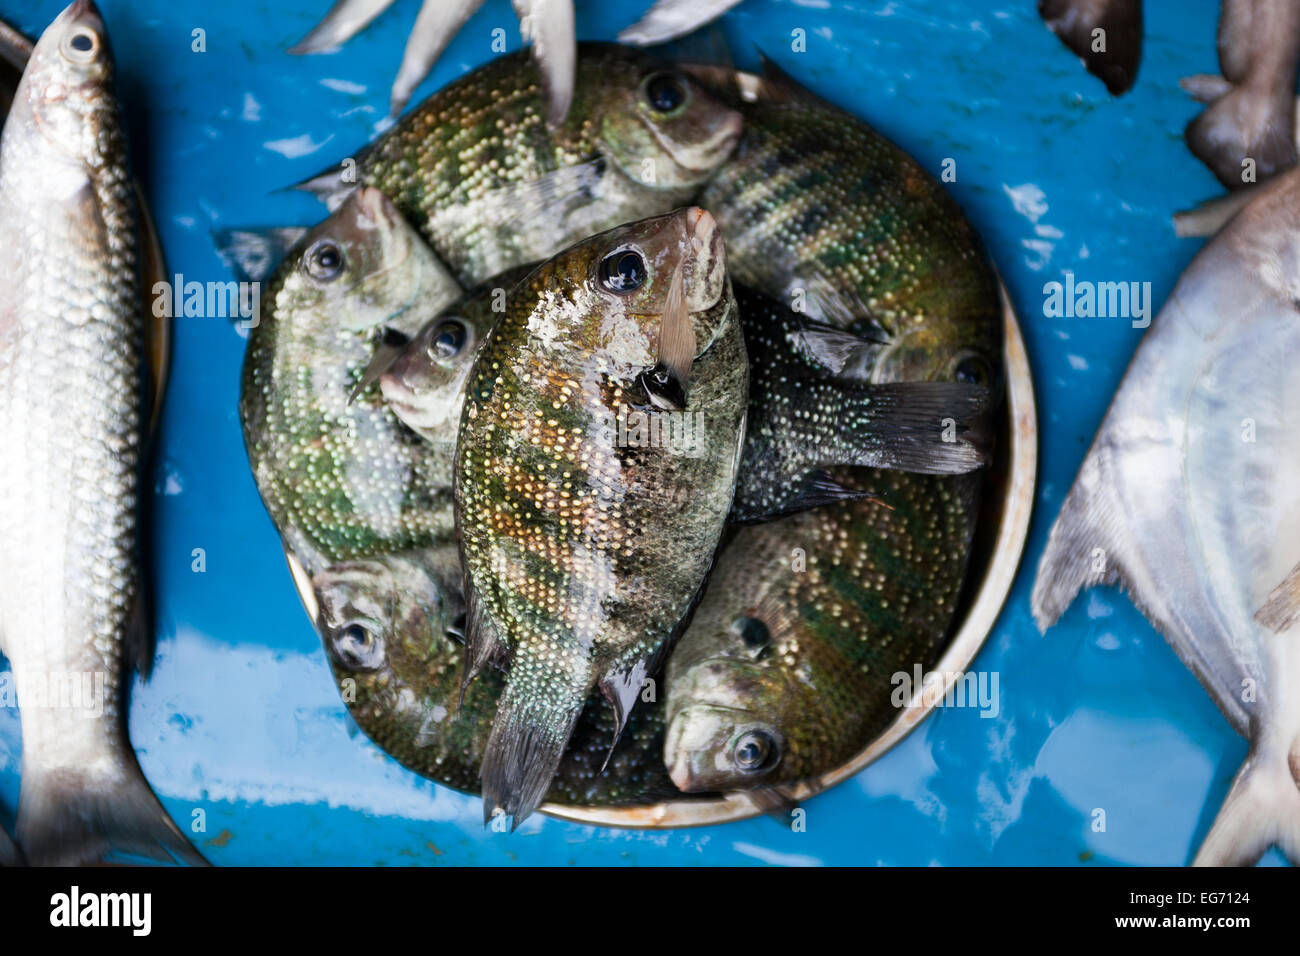 A bowl of fresh fish caught and displayed at a market in Cochin, Kerala, Southern India Stock Photo